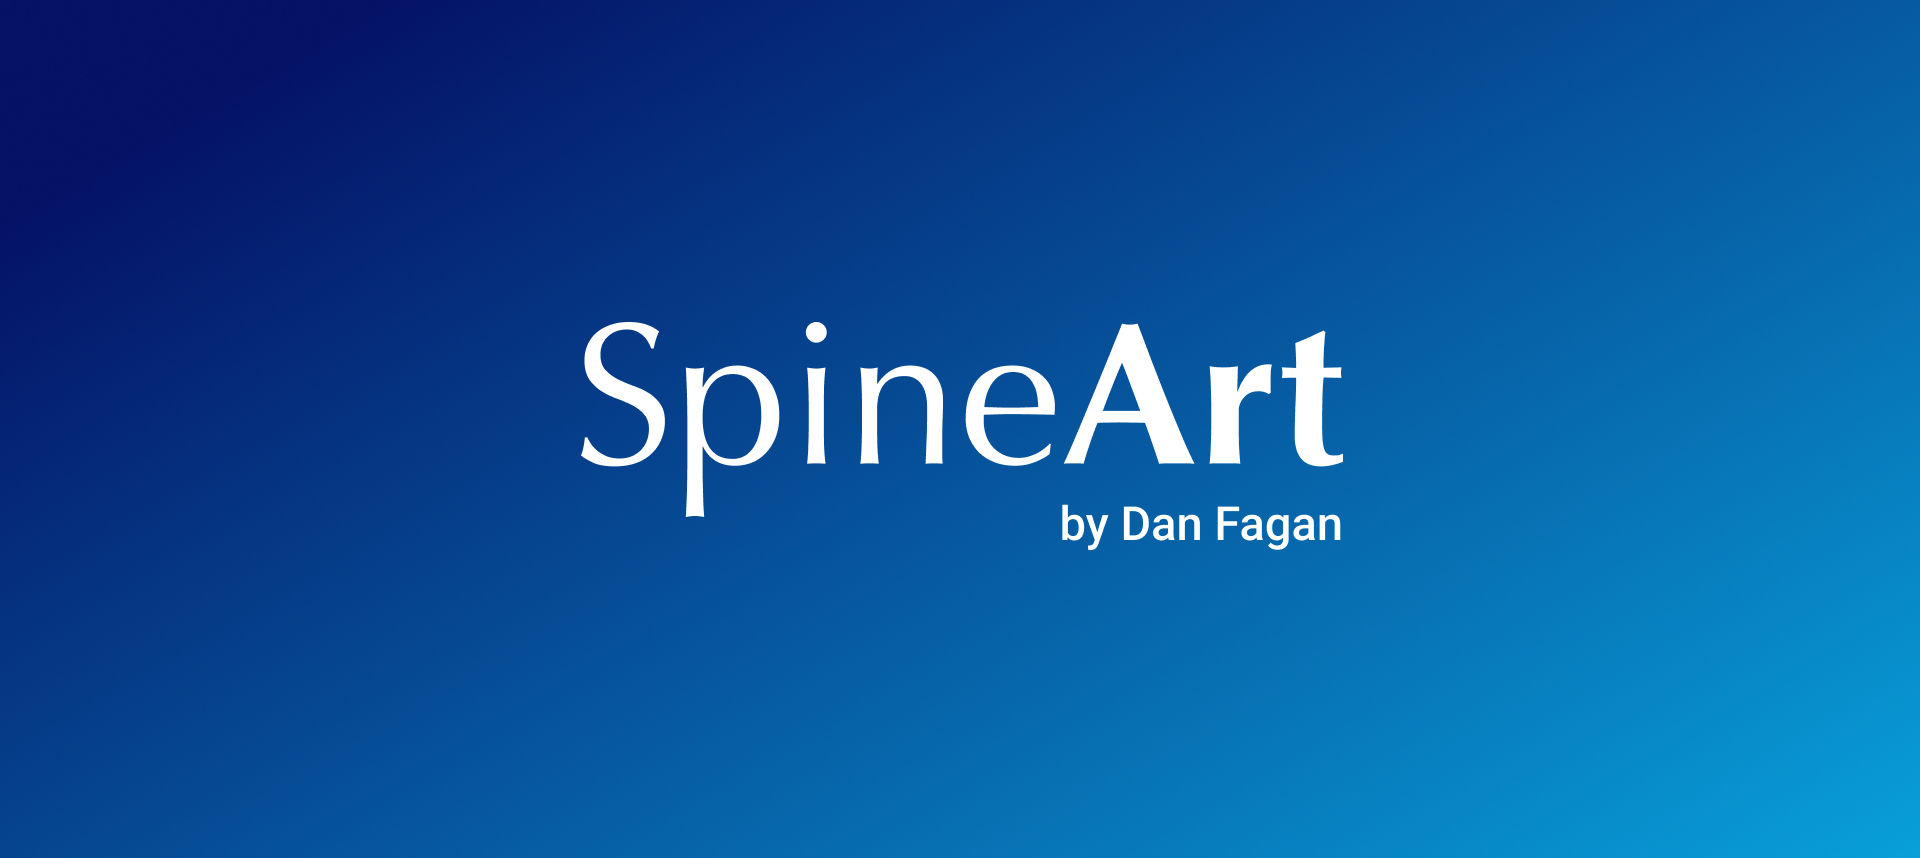 Dan Fagan Part of International Research Effort to help people with osteoporotic fractures